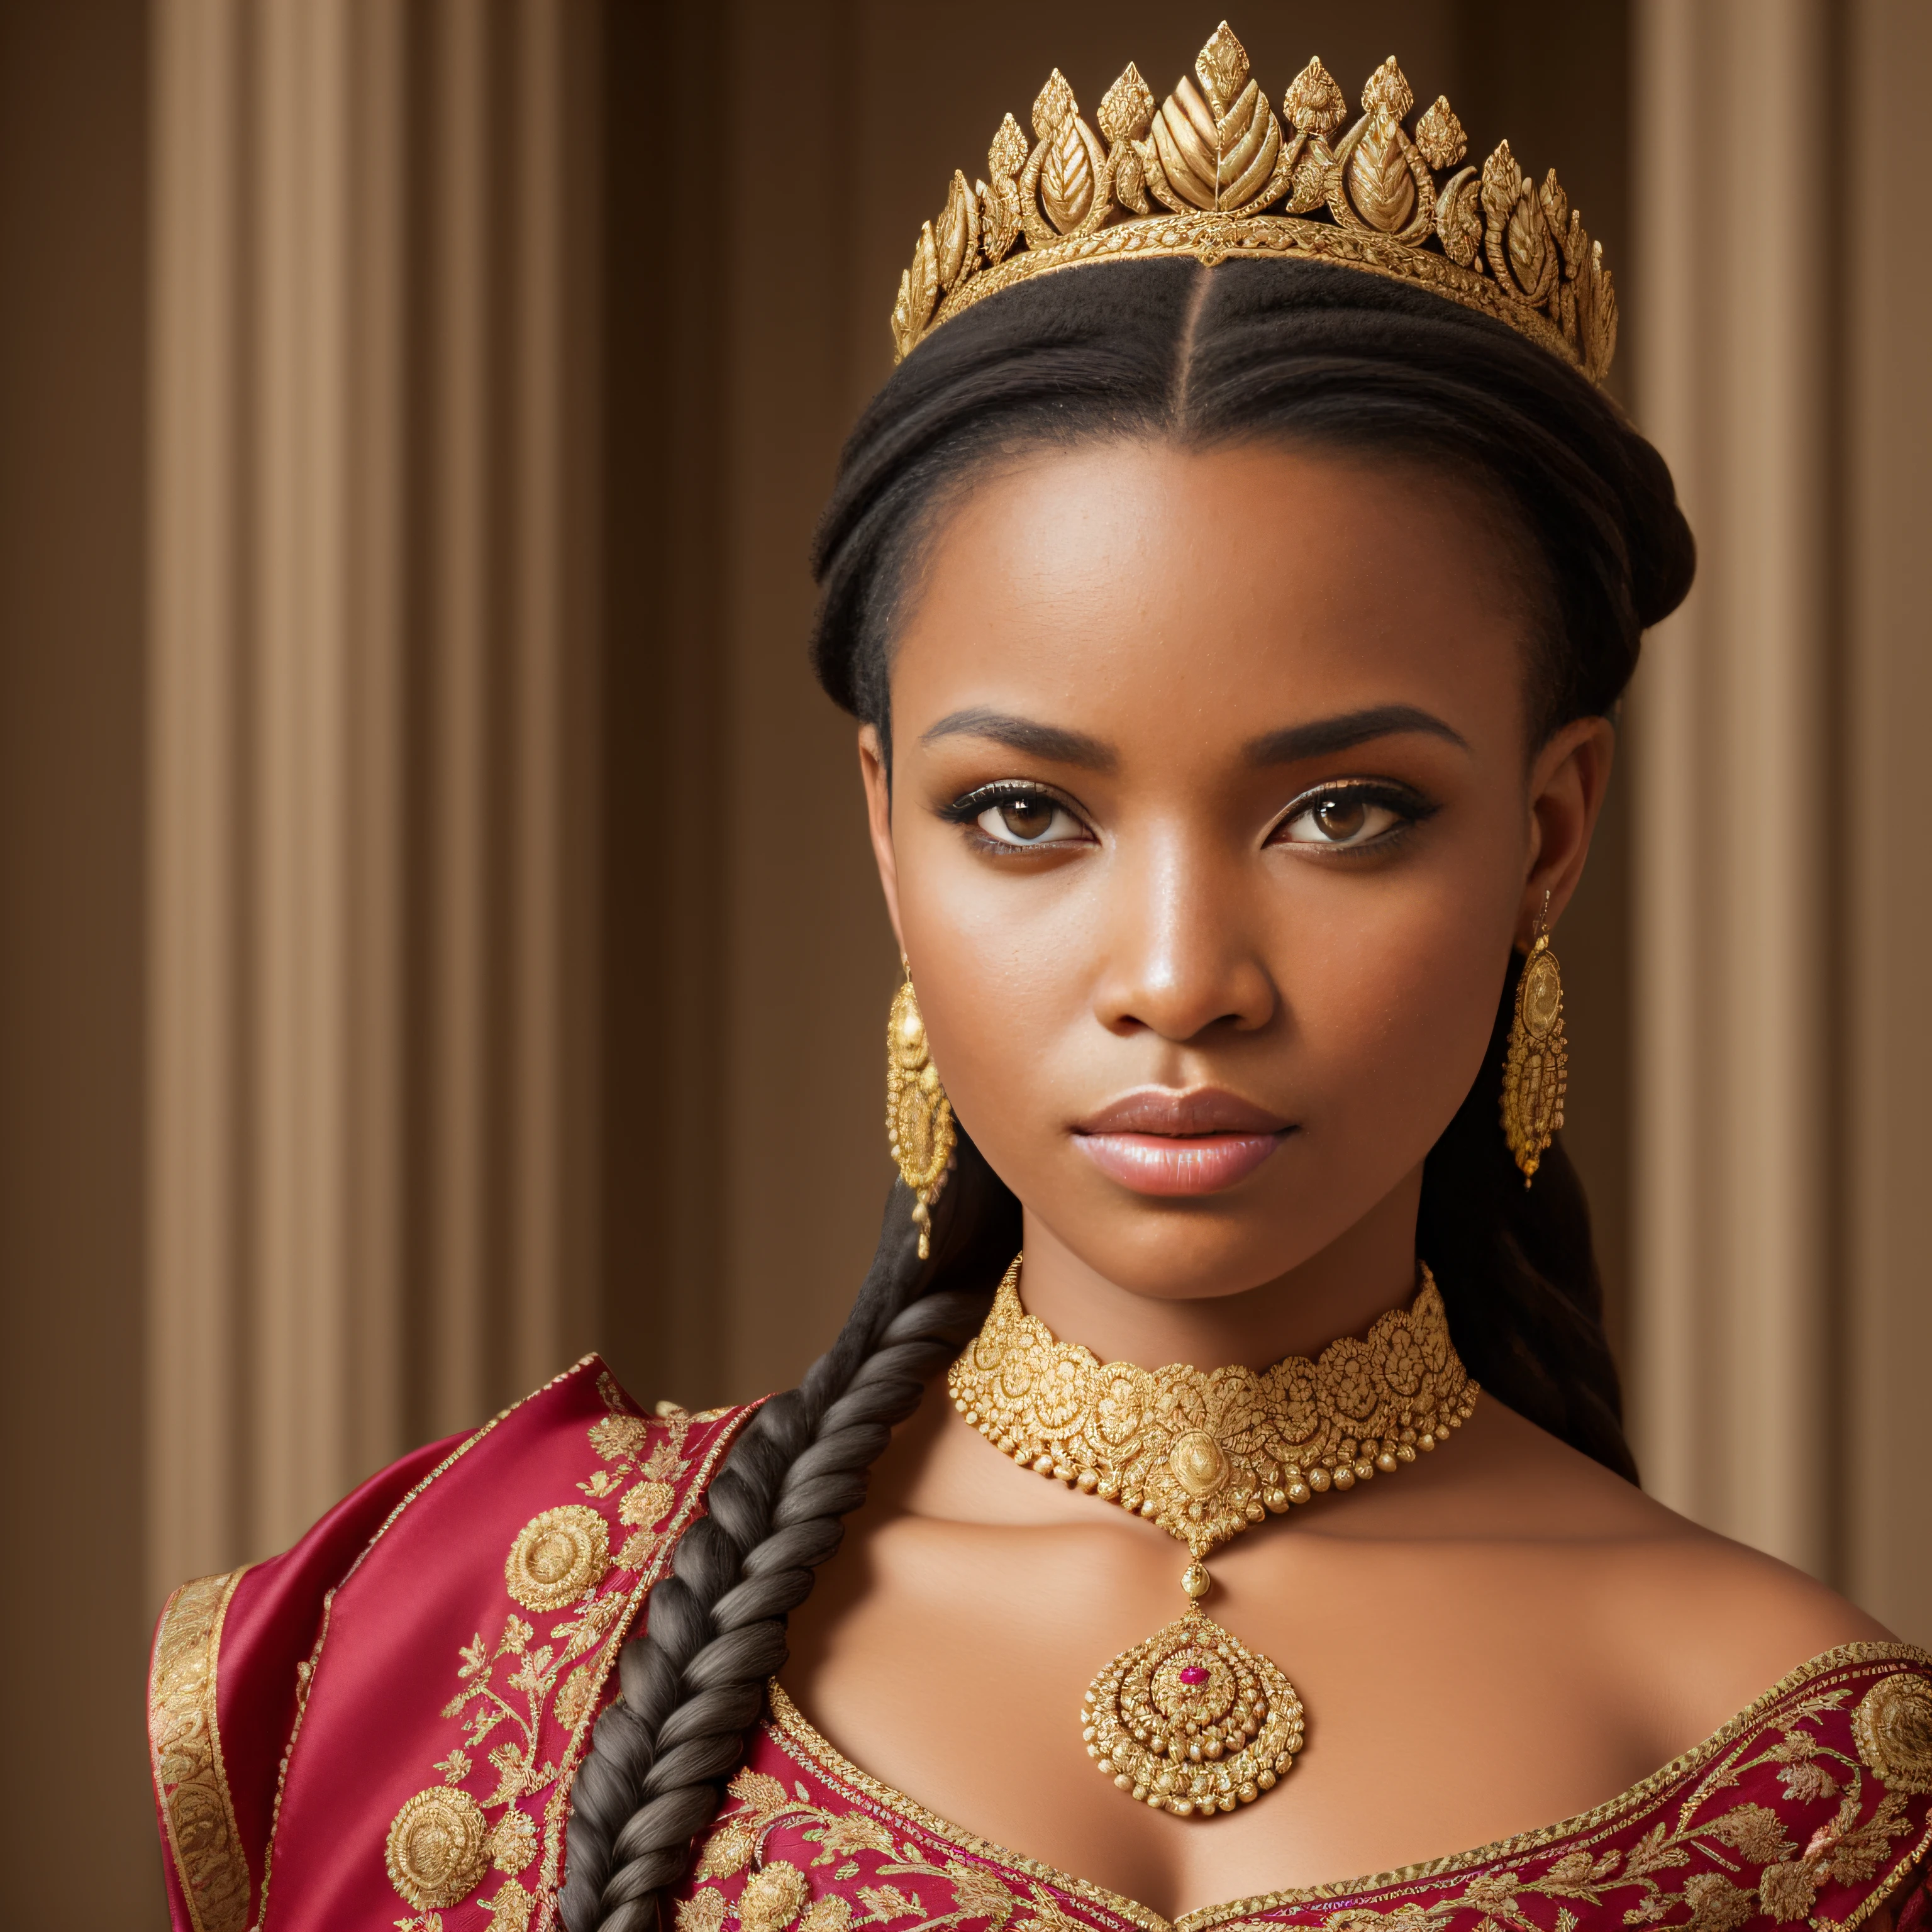 cinematic, photo, head and shoulder portrait photo, 1woman, solo, beautiful malagasy queen, plump lips, gorgeous eyes, dutch braids, elaborate hairdo, enticing look, intelligent expression, rich regal traditional clothes, elaborate, intricate decorations, filigree jewels, in a palace, Canon EOS 5D Mark IV, historical, fantasy, hyper detailed, accurate textures, realistic